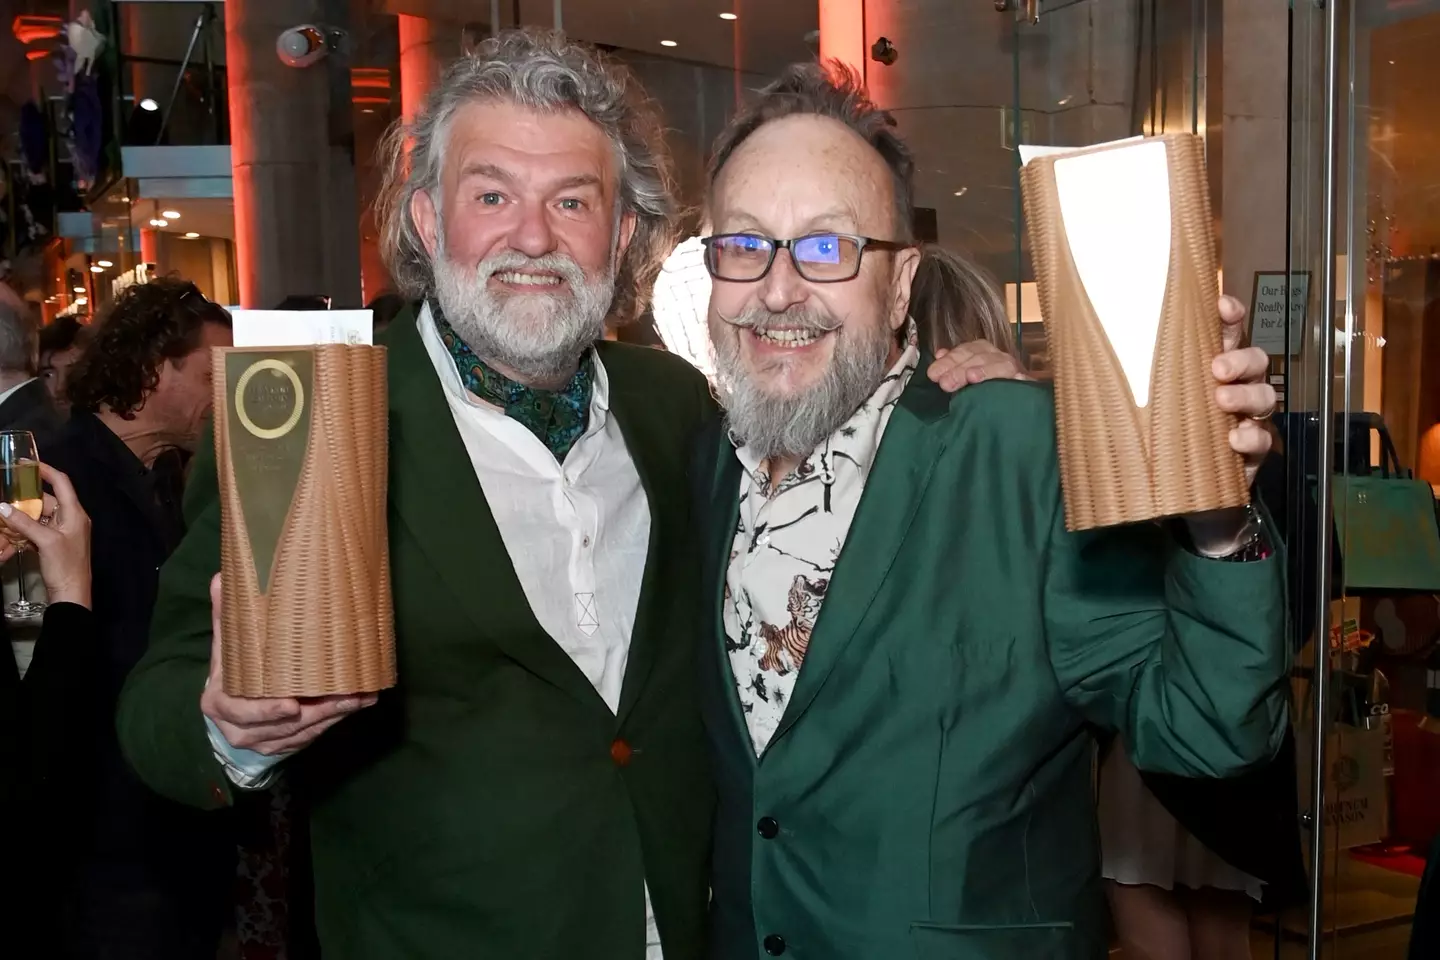 The Hairy Bikers finished filming their latest series before Myers' death.